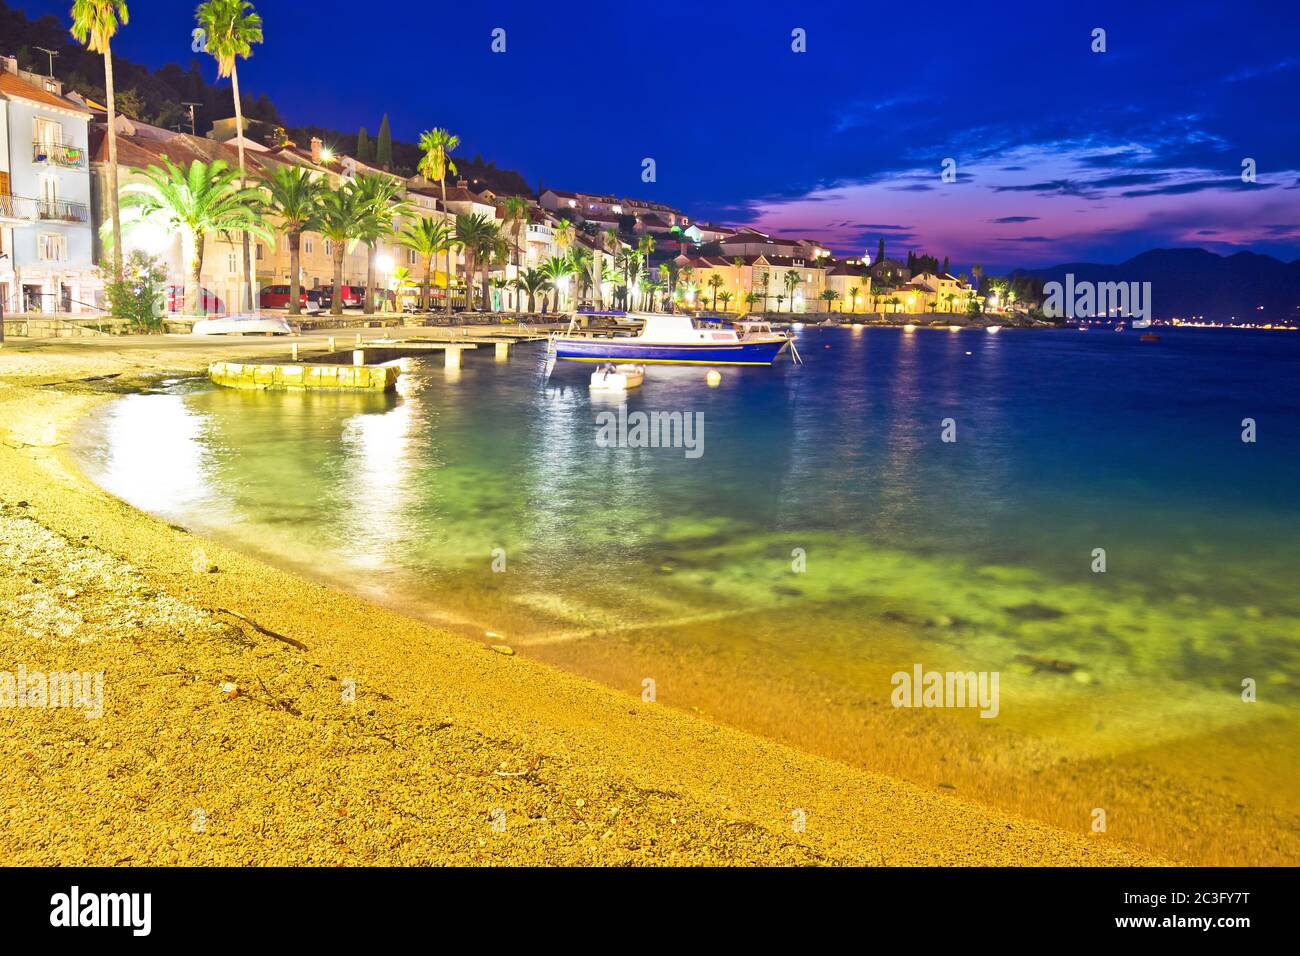 Korcula beach and waterfront colorful evening view Stock Photo